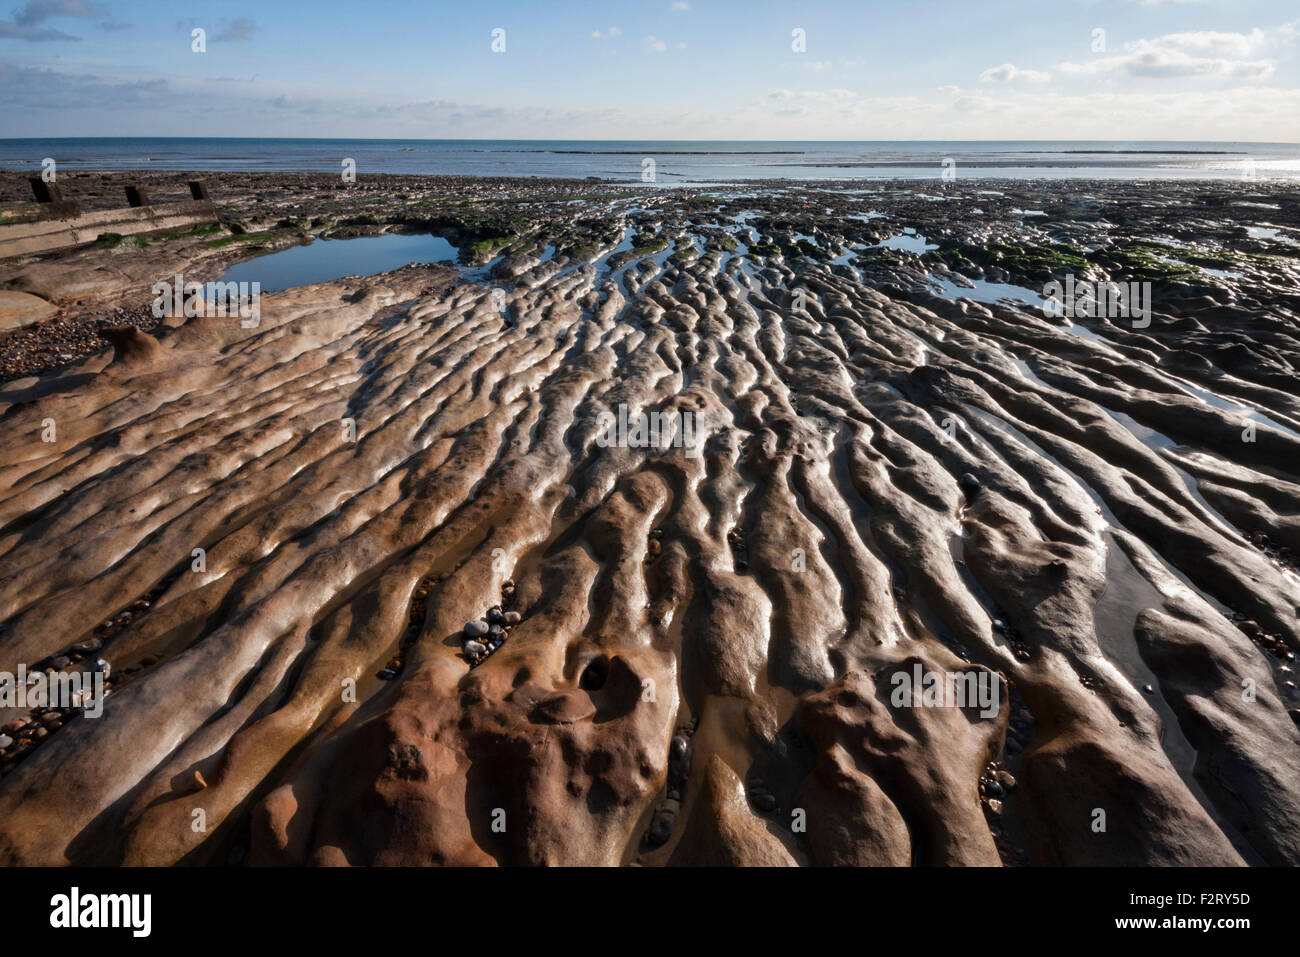 Rock ledge exposed by low tide at Bulverhythe, St Leonards on Sea, East Sussex, England, UK Stock Photo